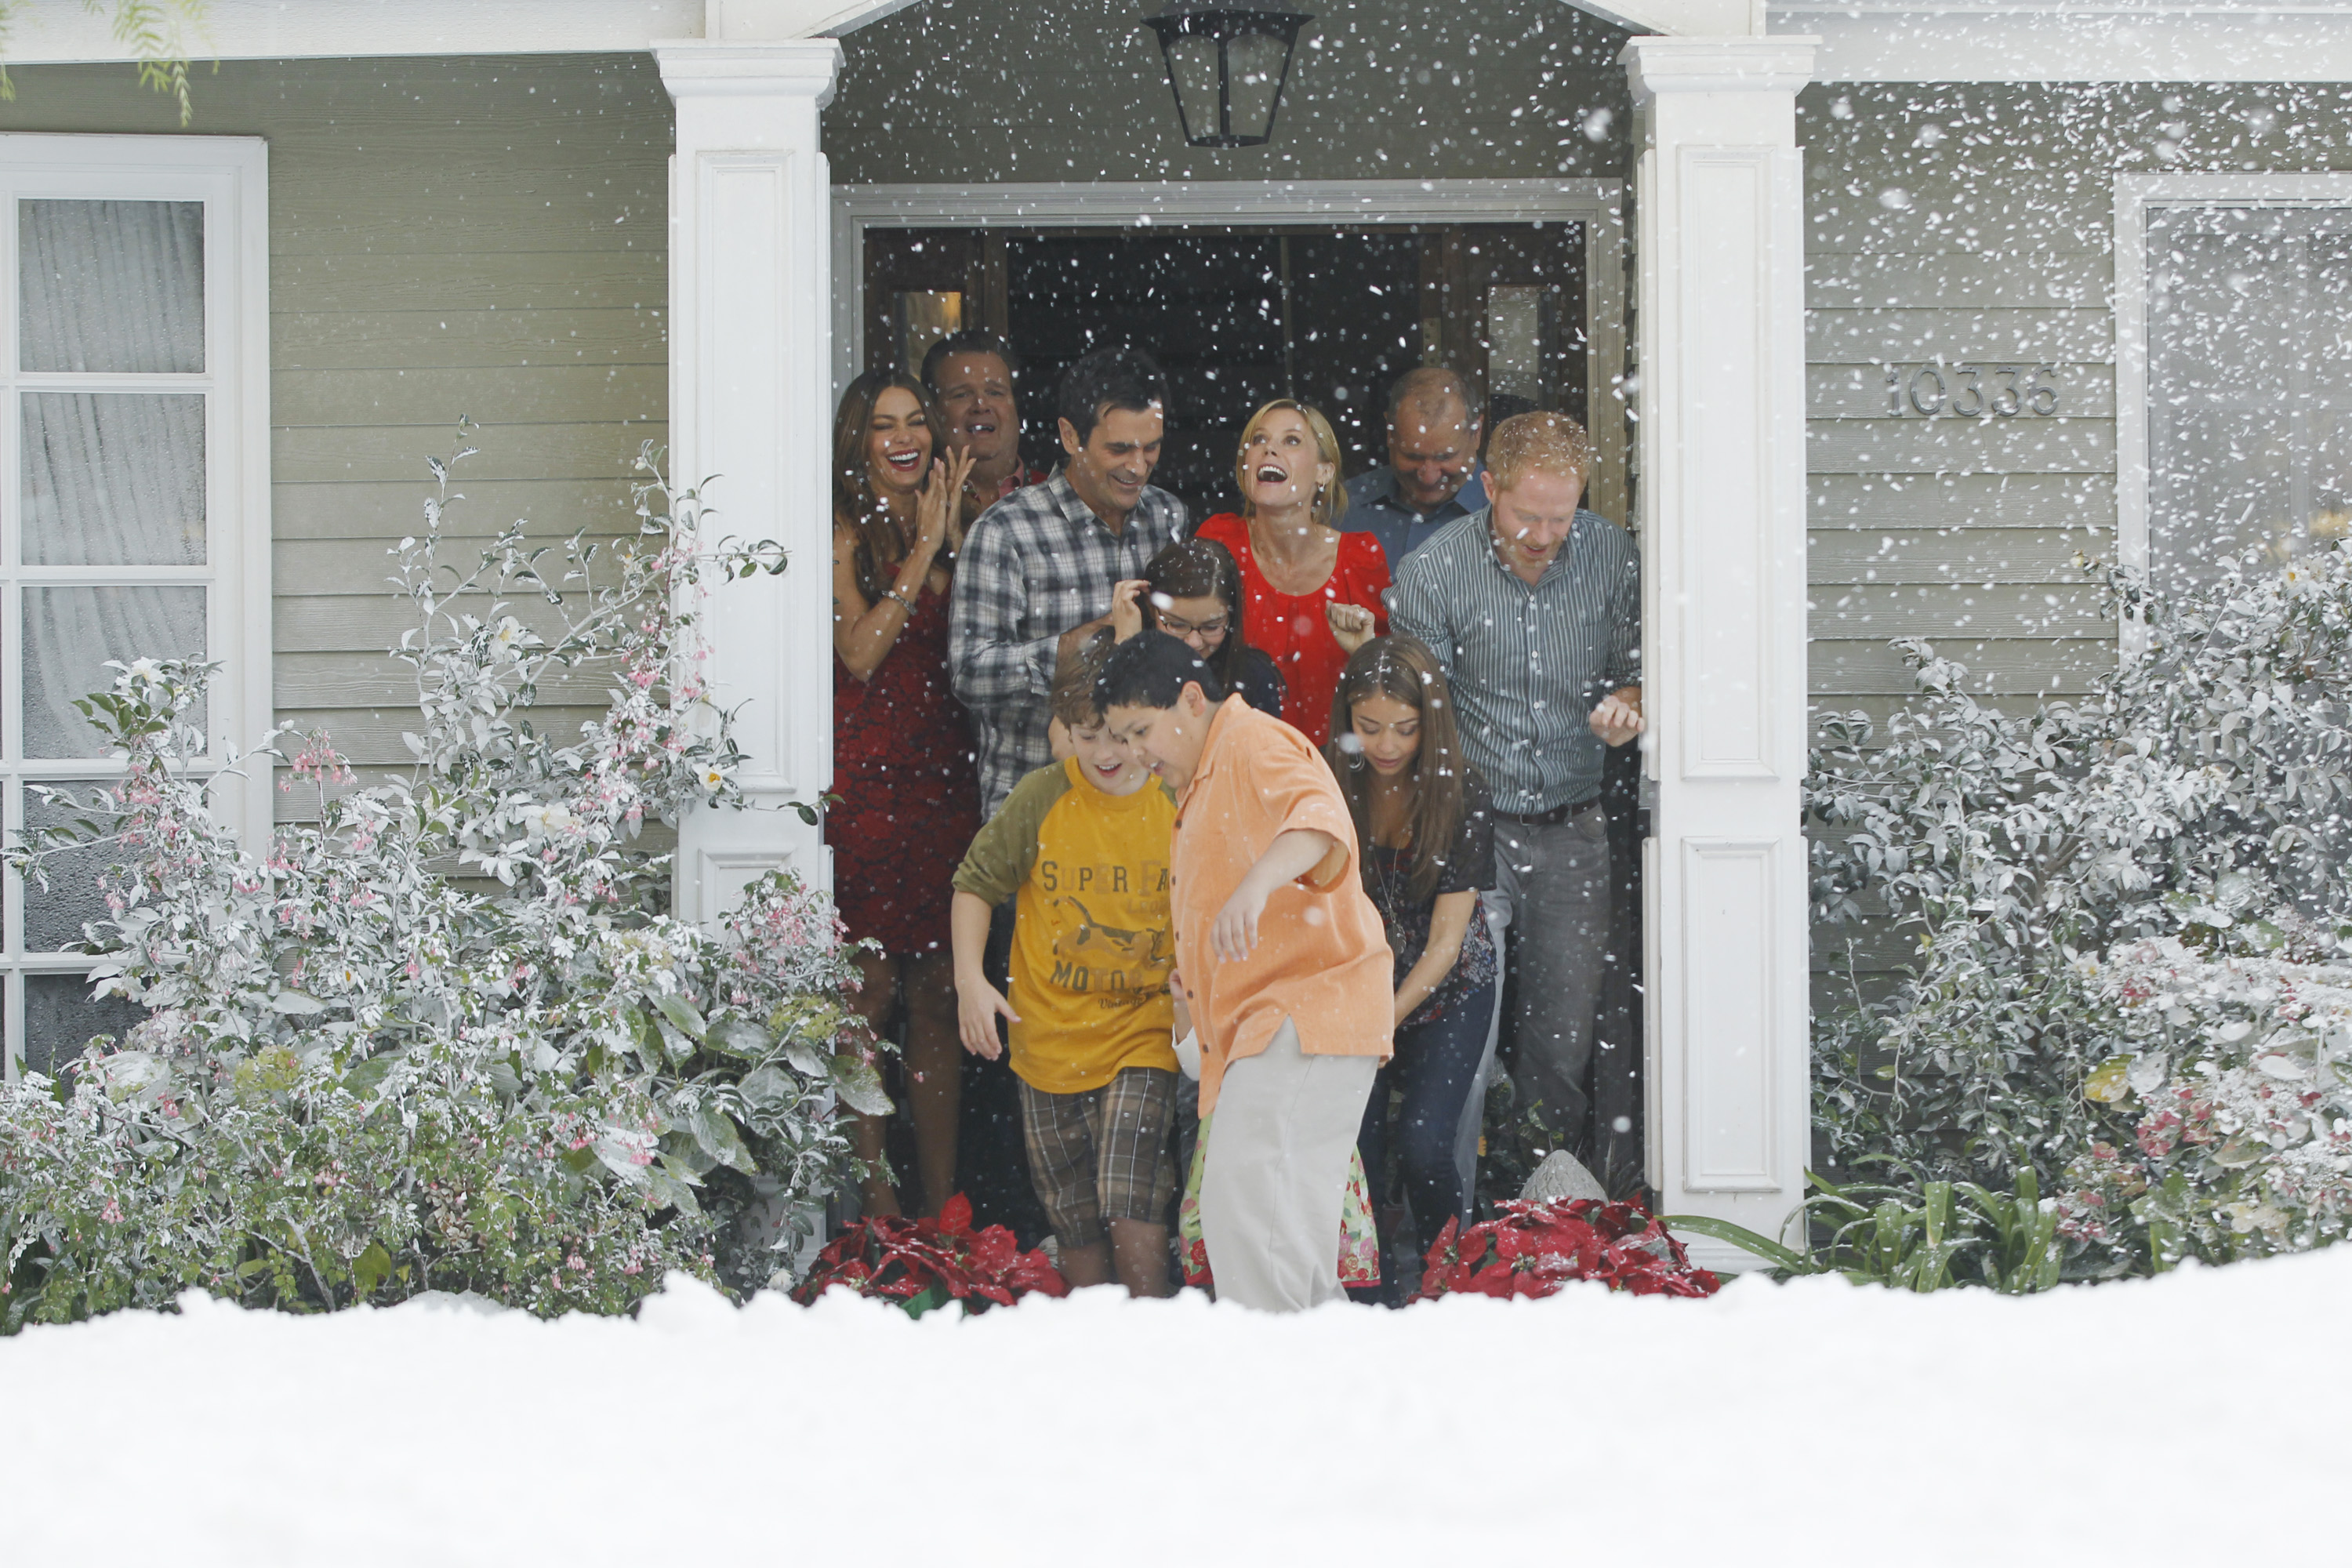 'Express Christmas' Episode of ABC's 'Modern Family' 